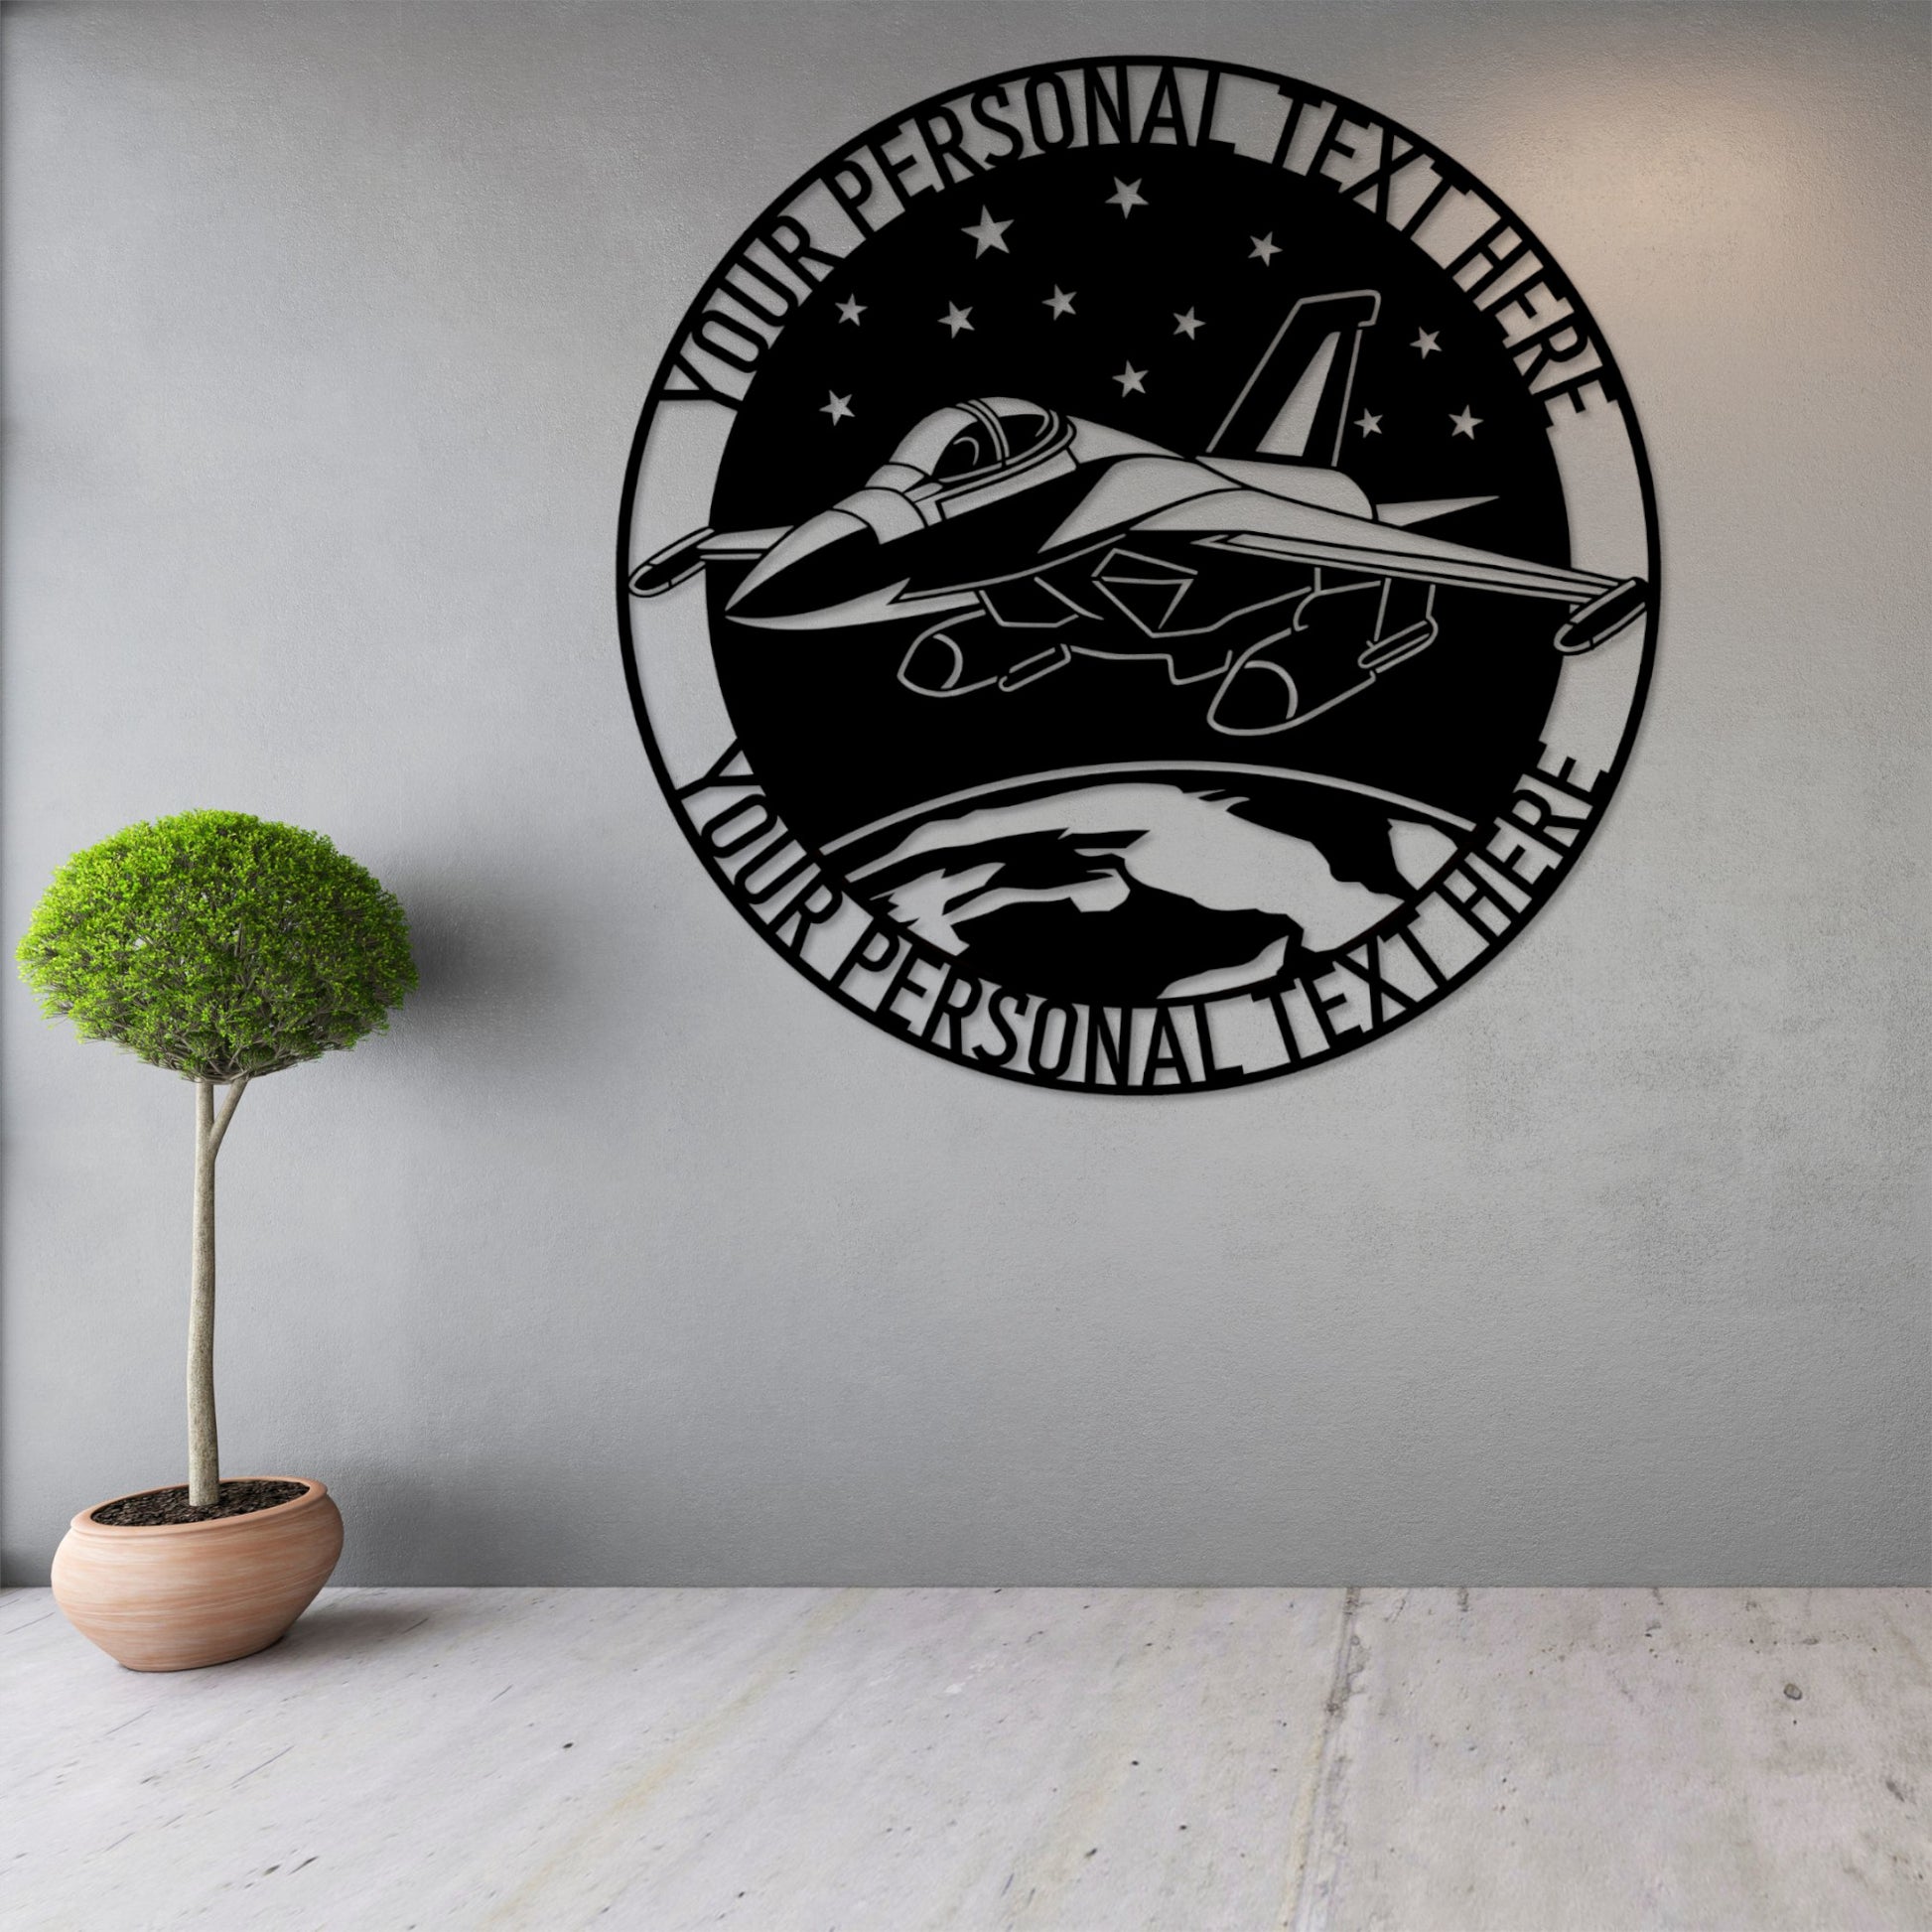 Personalized Fighter Pilot Metal Sign. Custom Jet Fighter Wall Decor Gift. Air Force Wall Hanging. Army Veteran Retirement.  Military Decor